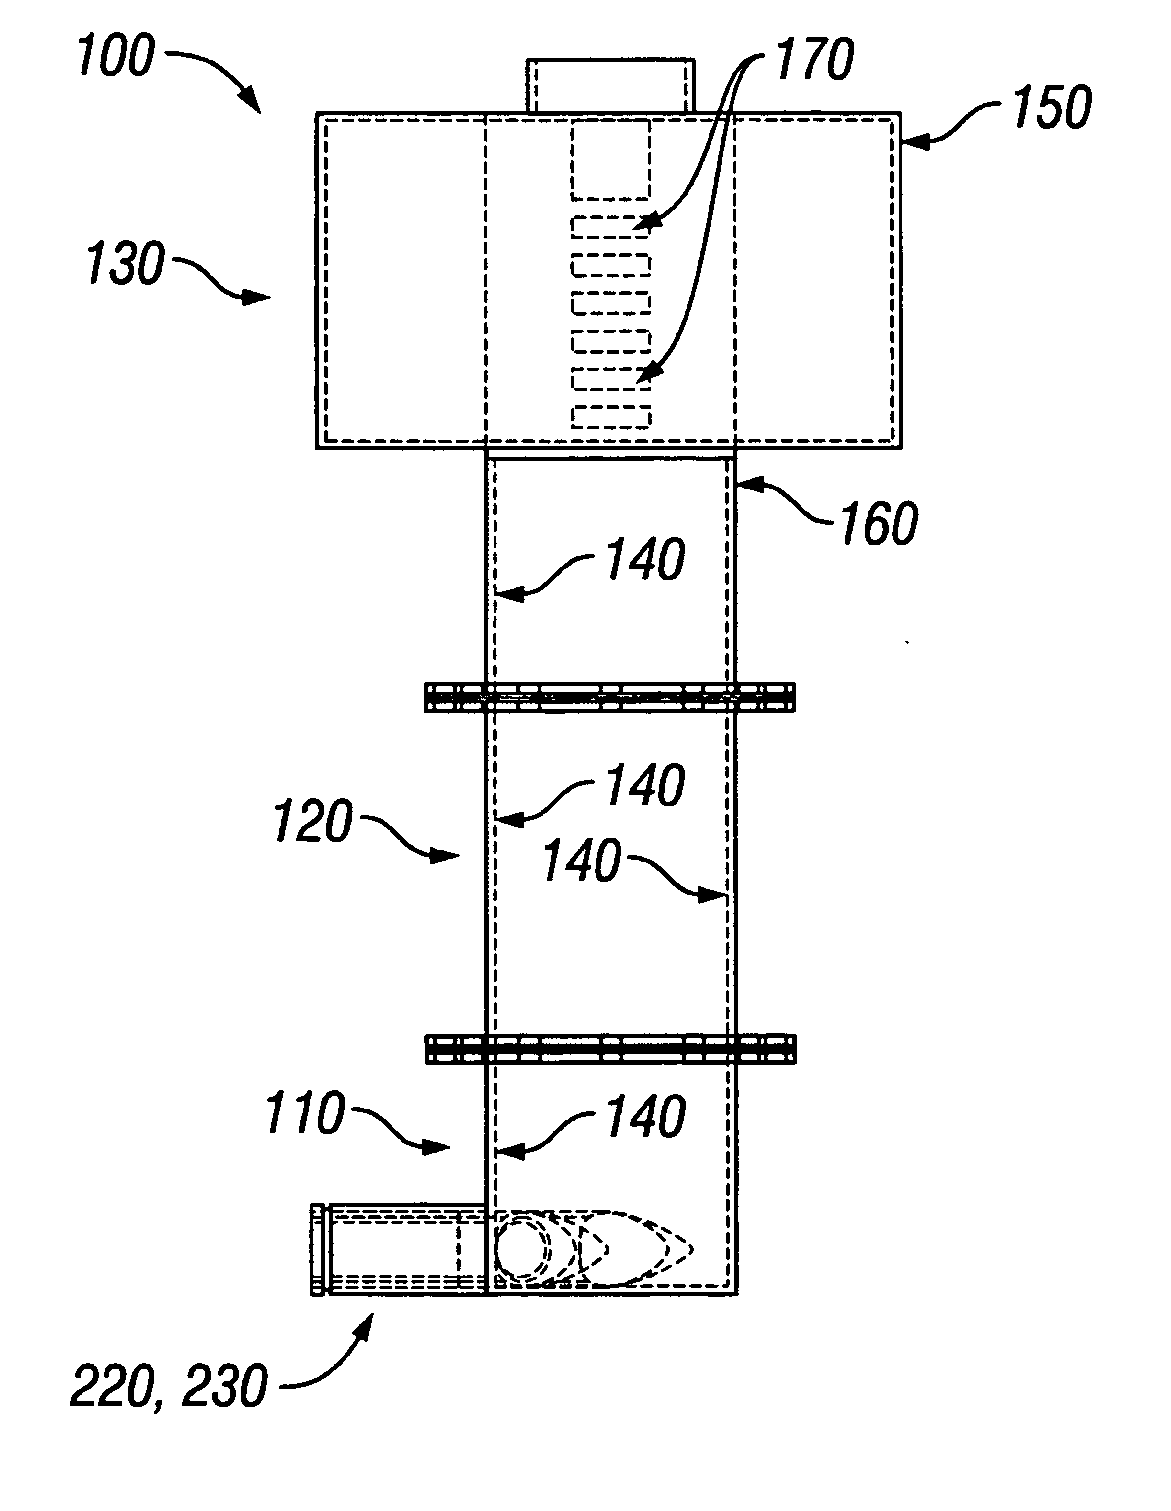 Dry polymer hydration apparatus and methods of use